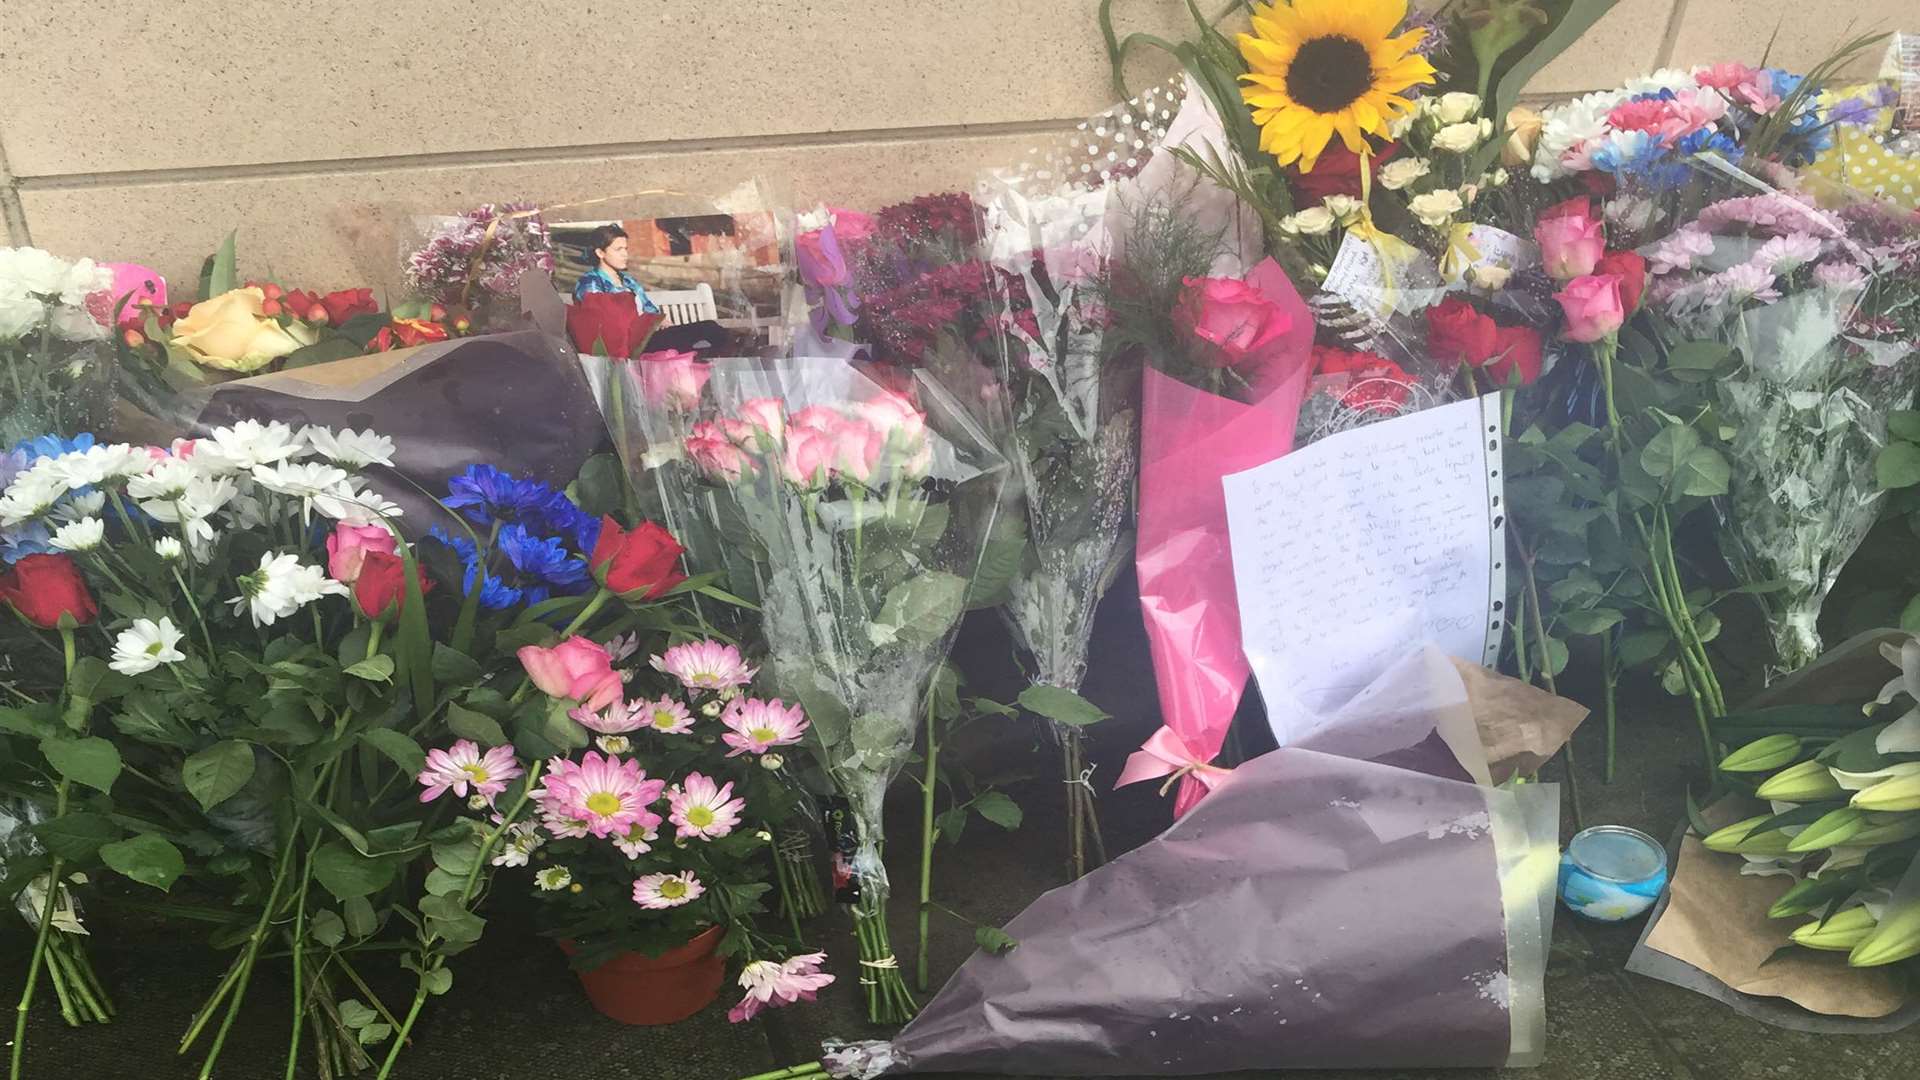 Floral tributes at the scene where Luhana Barros died